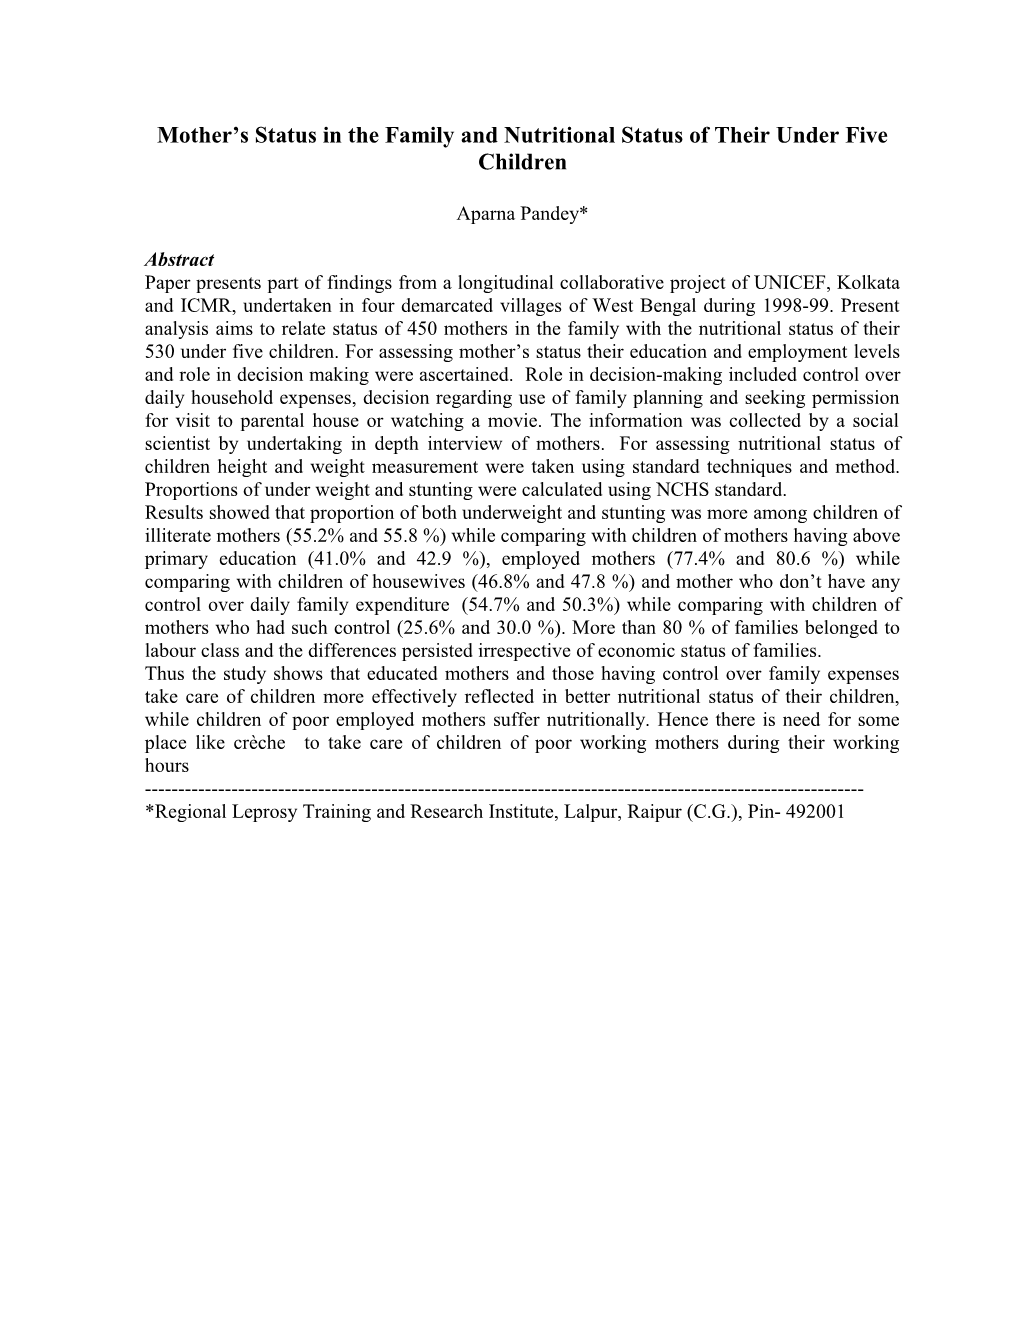 Title Mother S Status in the Family and Nutritional Status of Their Under Five Children